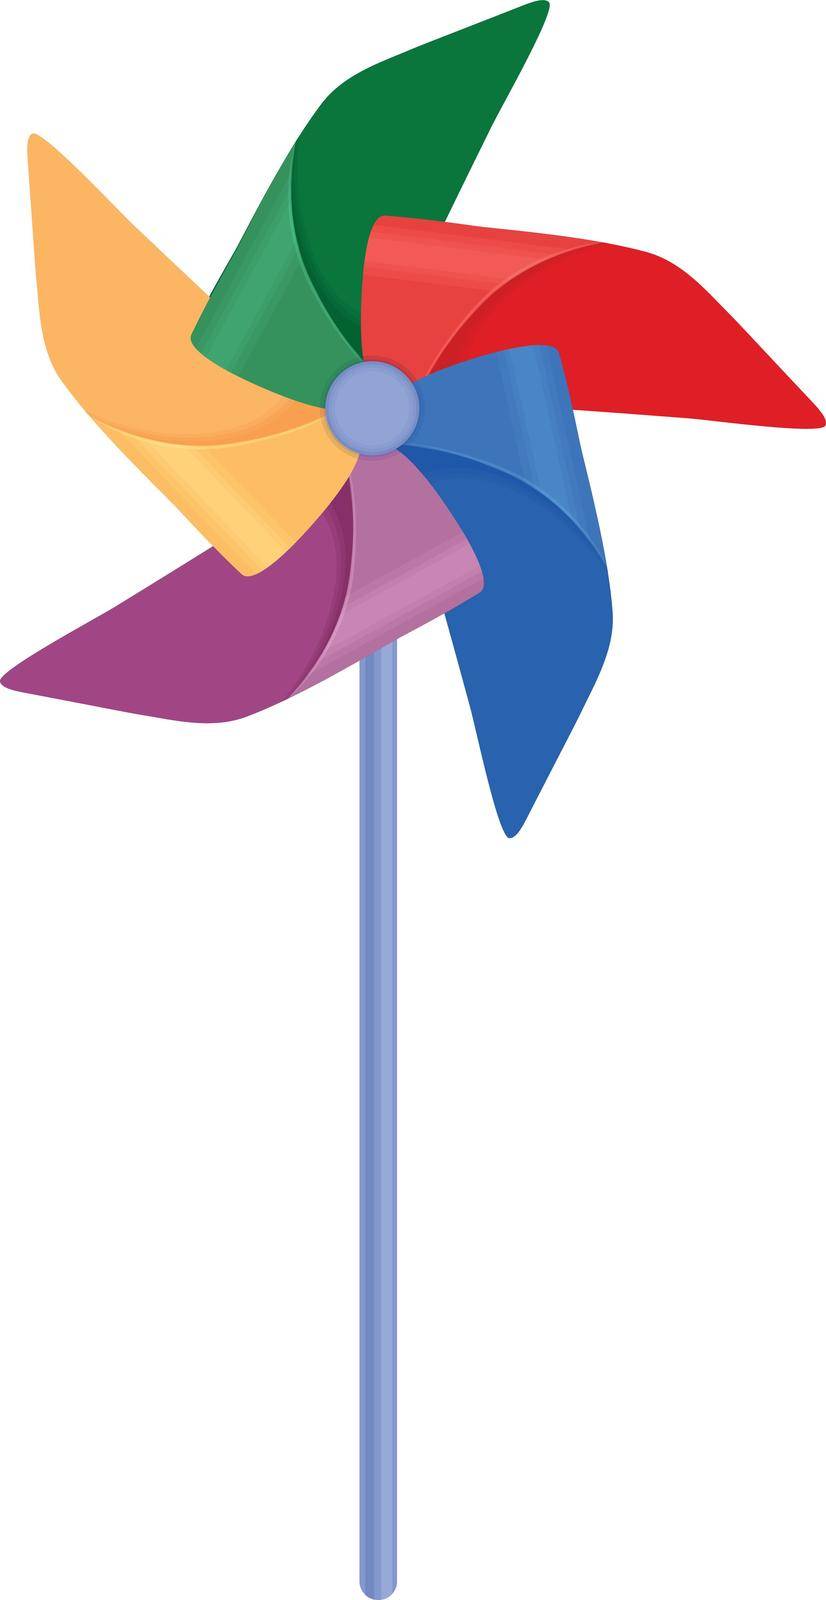 Children s toy windmill. Multi-colored windmill for children. Toy, vector illustration isolated on a white background.